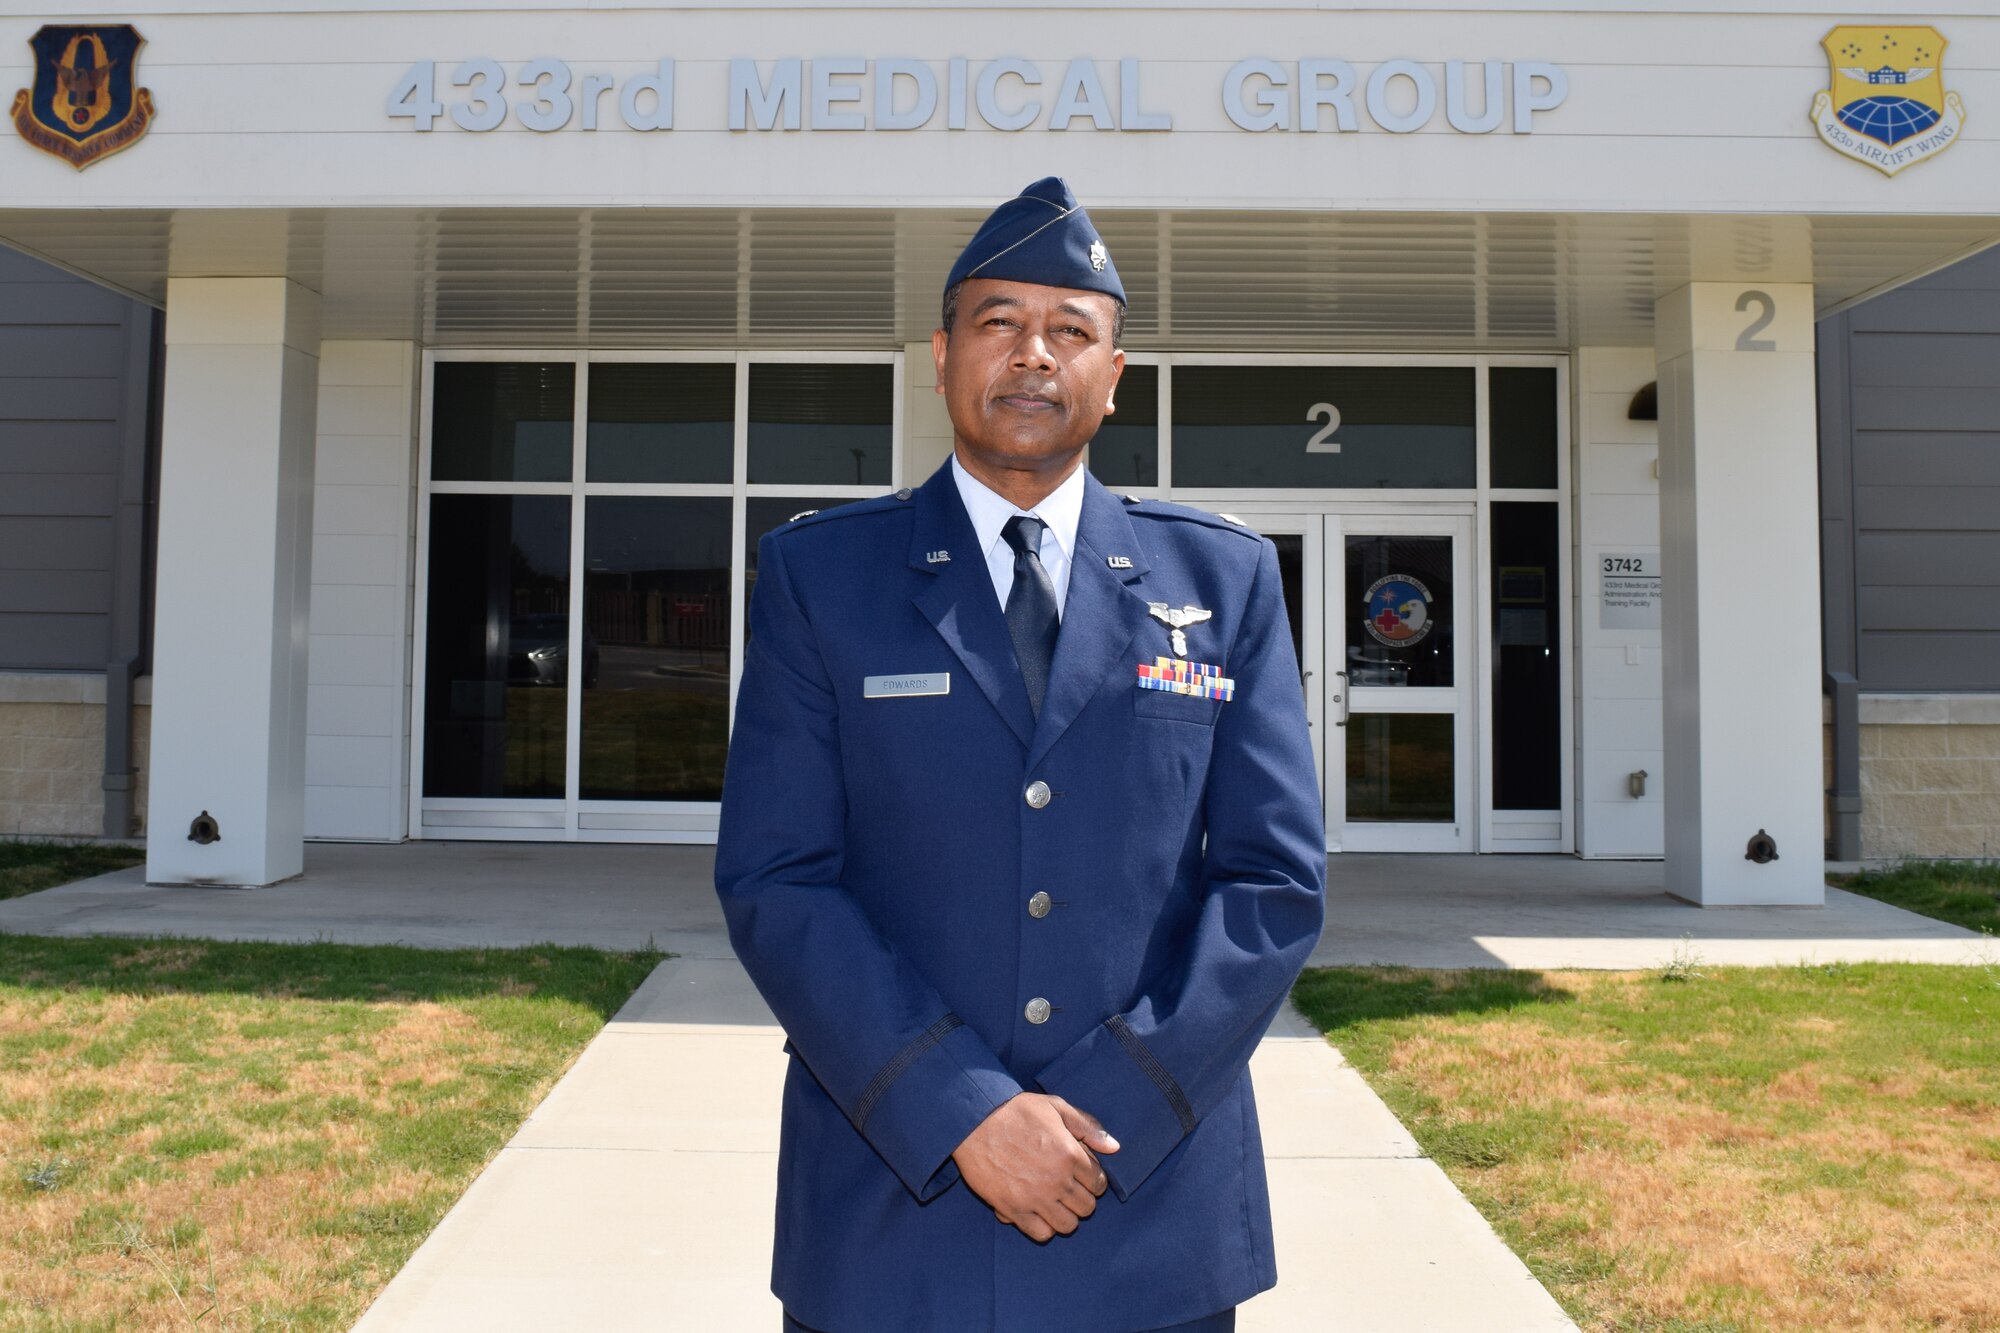 Lt. Col. Ivan Edwards, 433rd Aerospace Medicine Squadron flight surgeon, stands for a photograph at the 433rd Medical Group building on Joint Base San Antonio-Lackland, Texas, Sept. 21, 2021. Edwards emigrated from Uganda to the United States and became a physical medicine and rehabilitation physician. (U.S. Air Force photo by Senior Airman Brittany Wich)